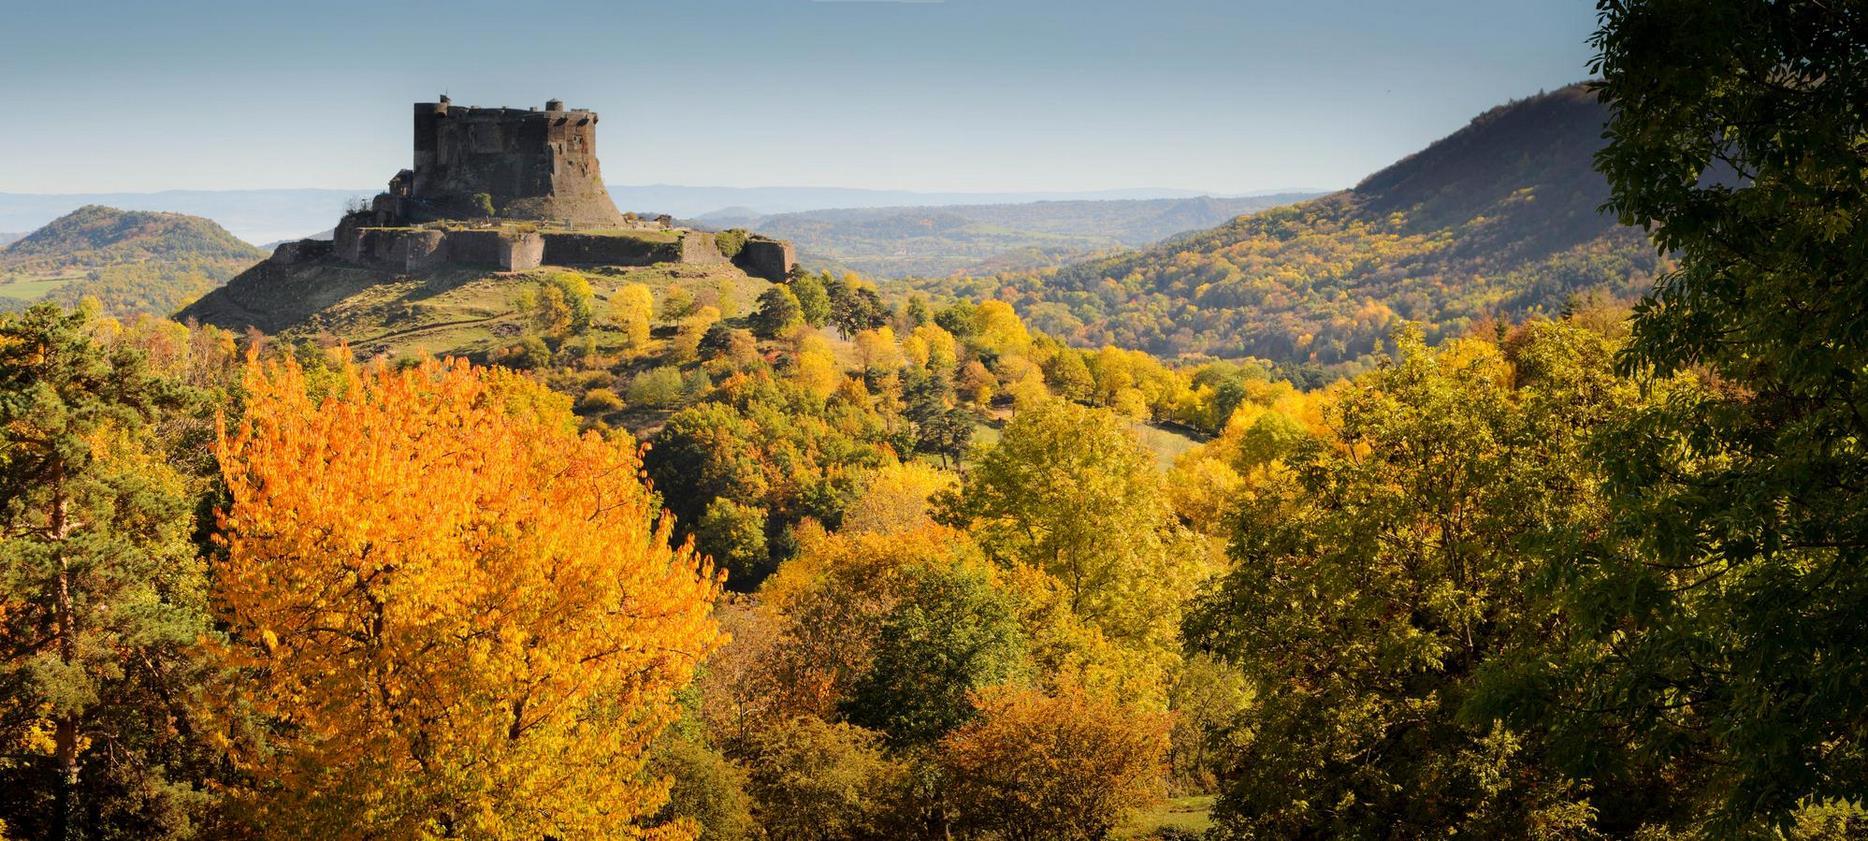 The Chateau de Murol overlooking the Murol valley in Autumn